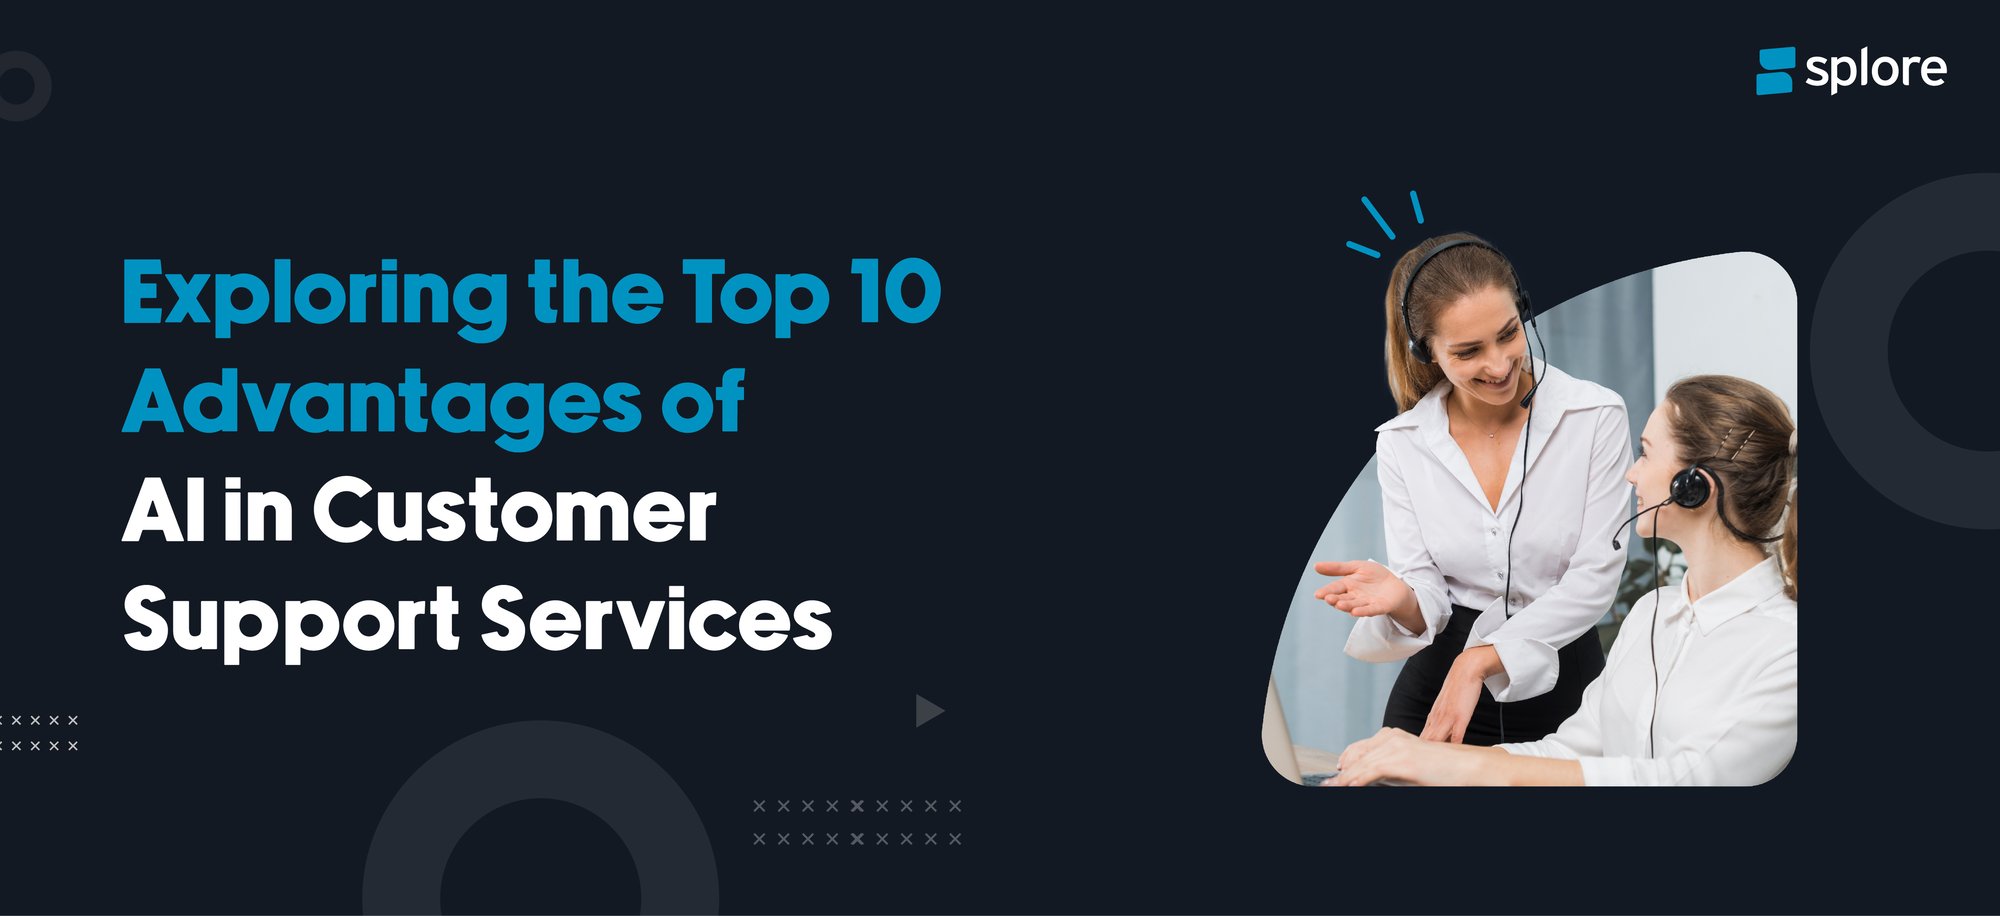 Exploring the Top 10 Advantages of AI in Customer Support Services